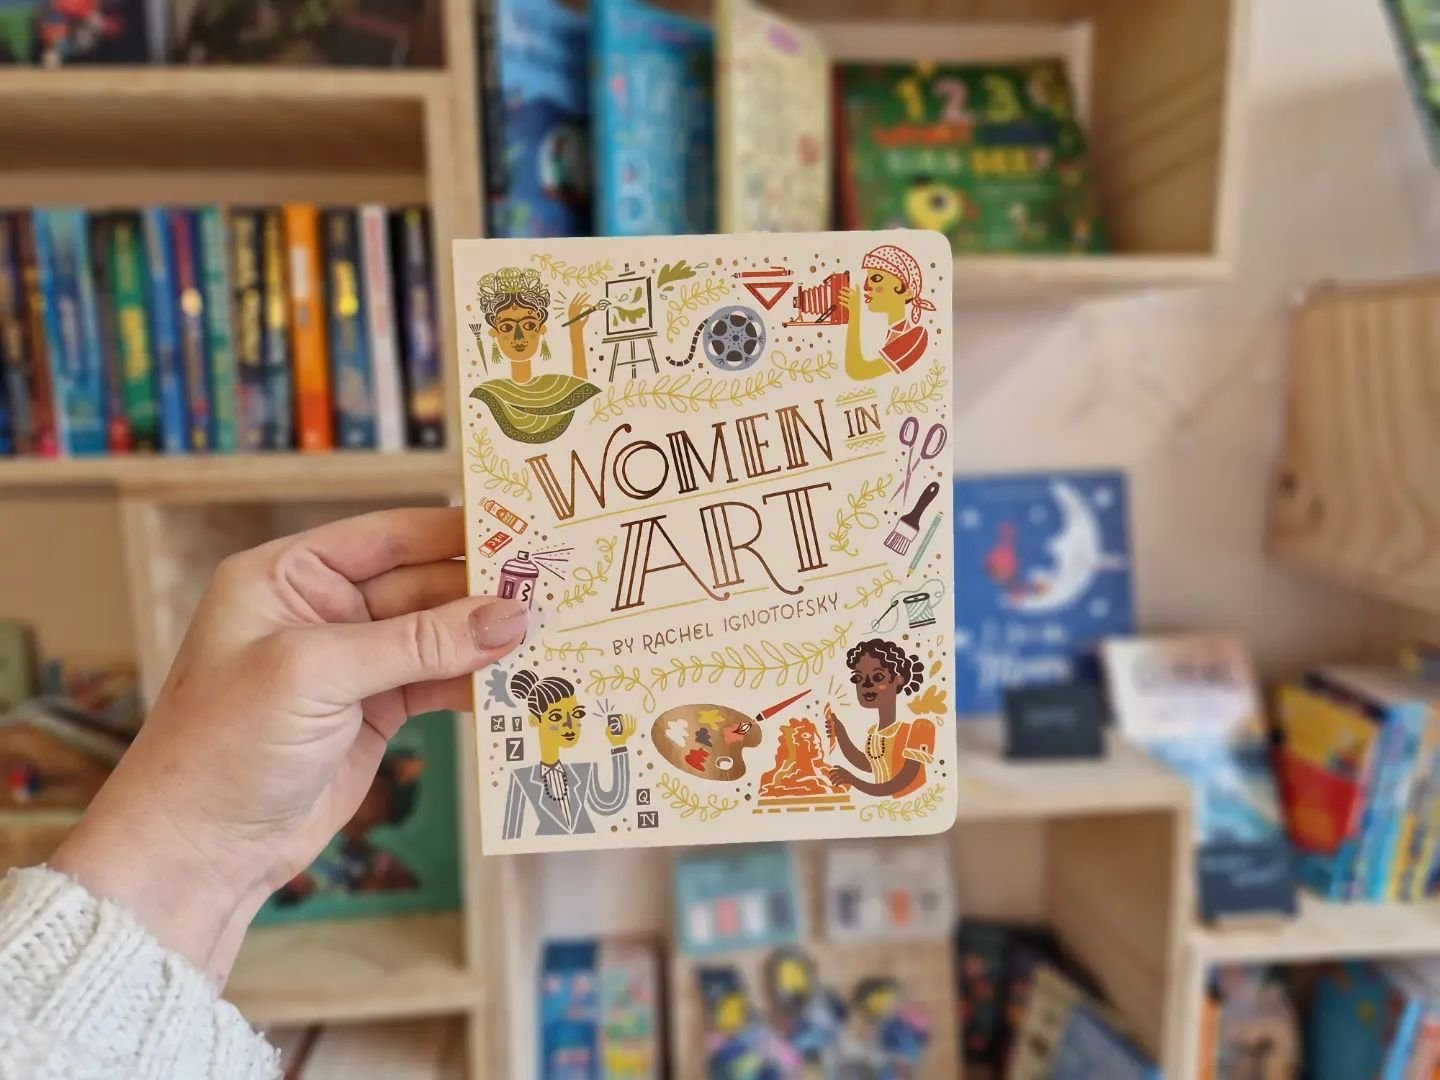 ✨️ Lots of beautiful new books looking for lovely homes ✨️

#hillsboroughbookshop #supportsmallbusiness #indiebookseller #supportsmallbusiness #hillsboroughbookshop #childrensliterature #childrensbookstagram #youngreaders #readingtogether #earlyreade